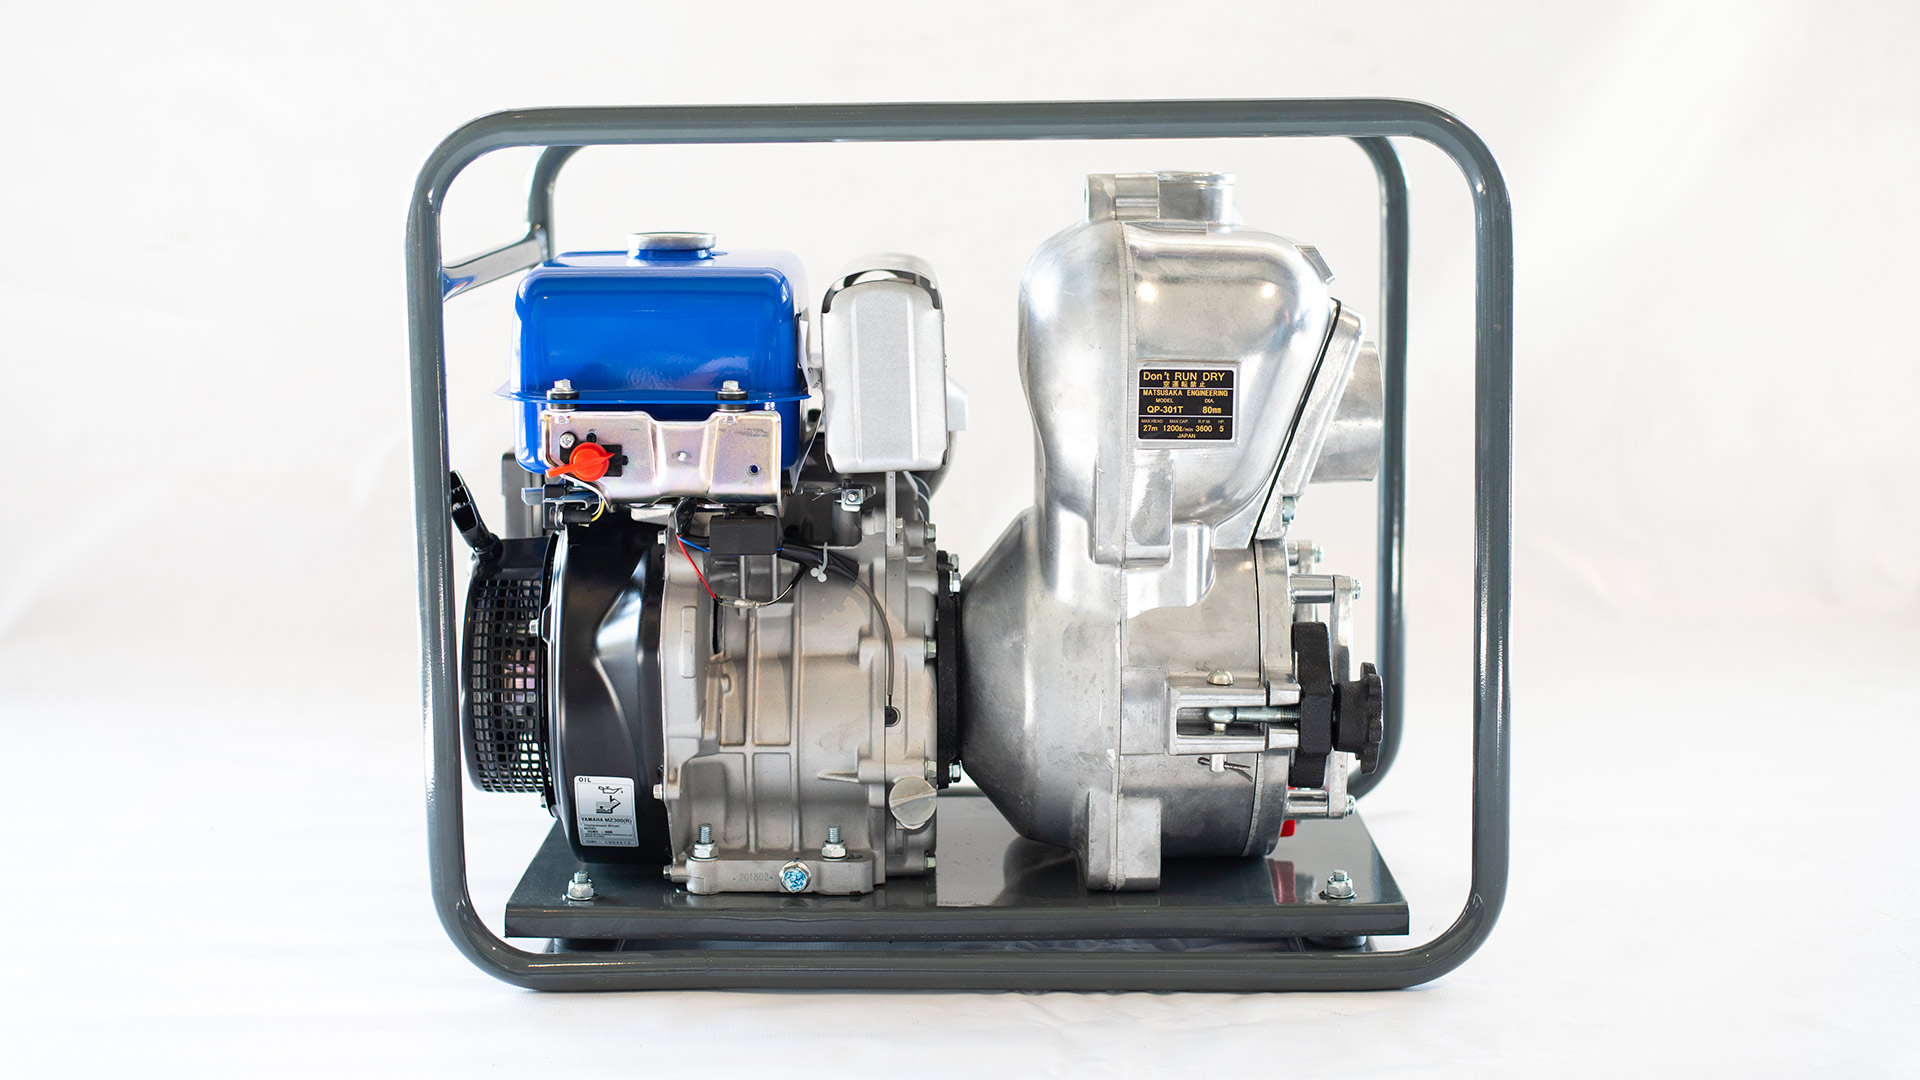 YAMAHA ETP75 PUMP - CAPABLE HANDLING:
Built for tough dewatering and trash pumping, the ETP75 is capable of handling solids such as debris, sand and small stones. This 3 inch inlet/outlet pump is driven by Yamaha’s MZ175, 5.5hp engine fitted to an open type, aluminium, two-vane impeller and inner volute casing.